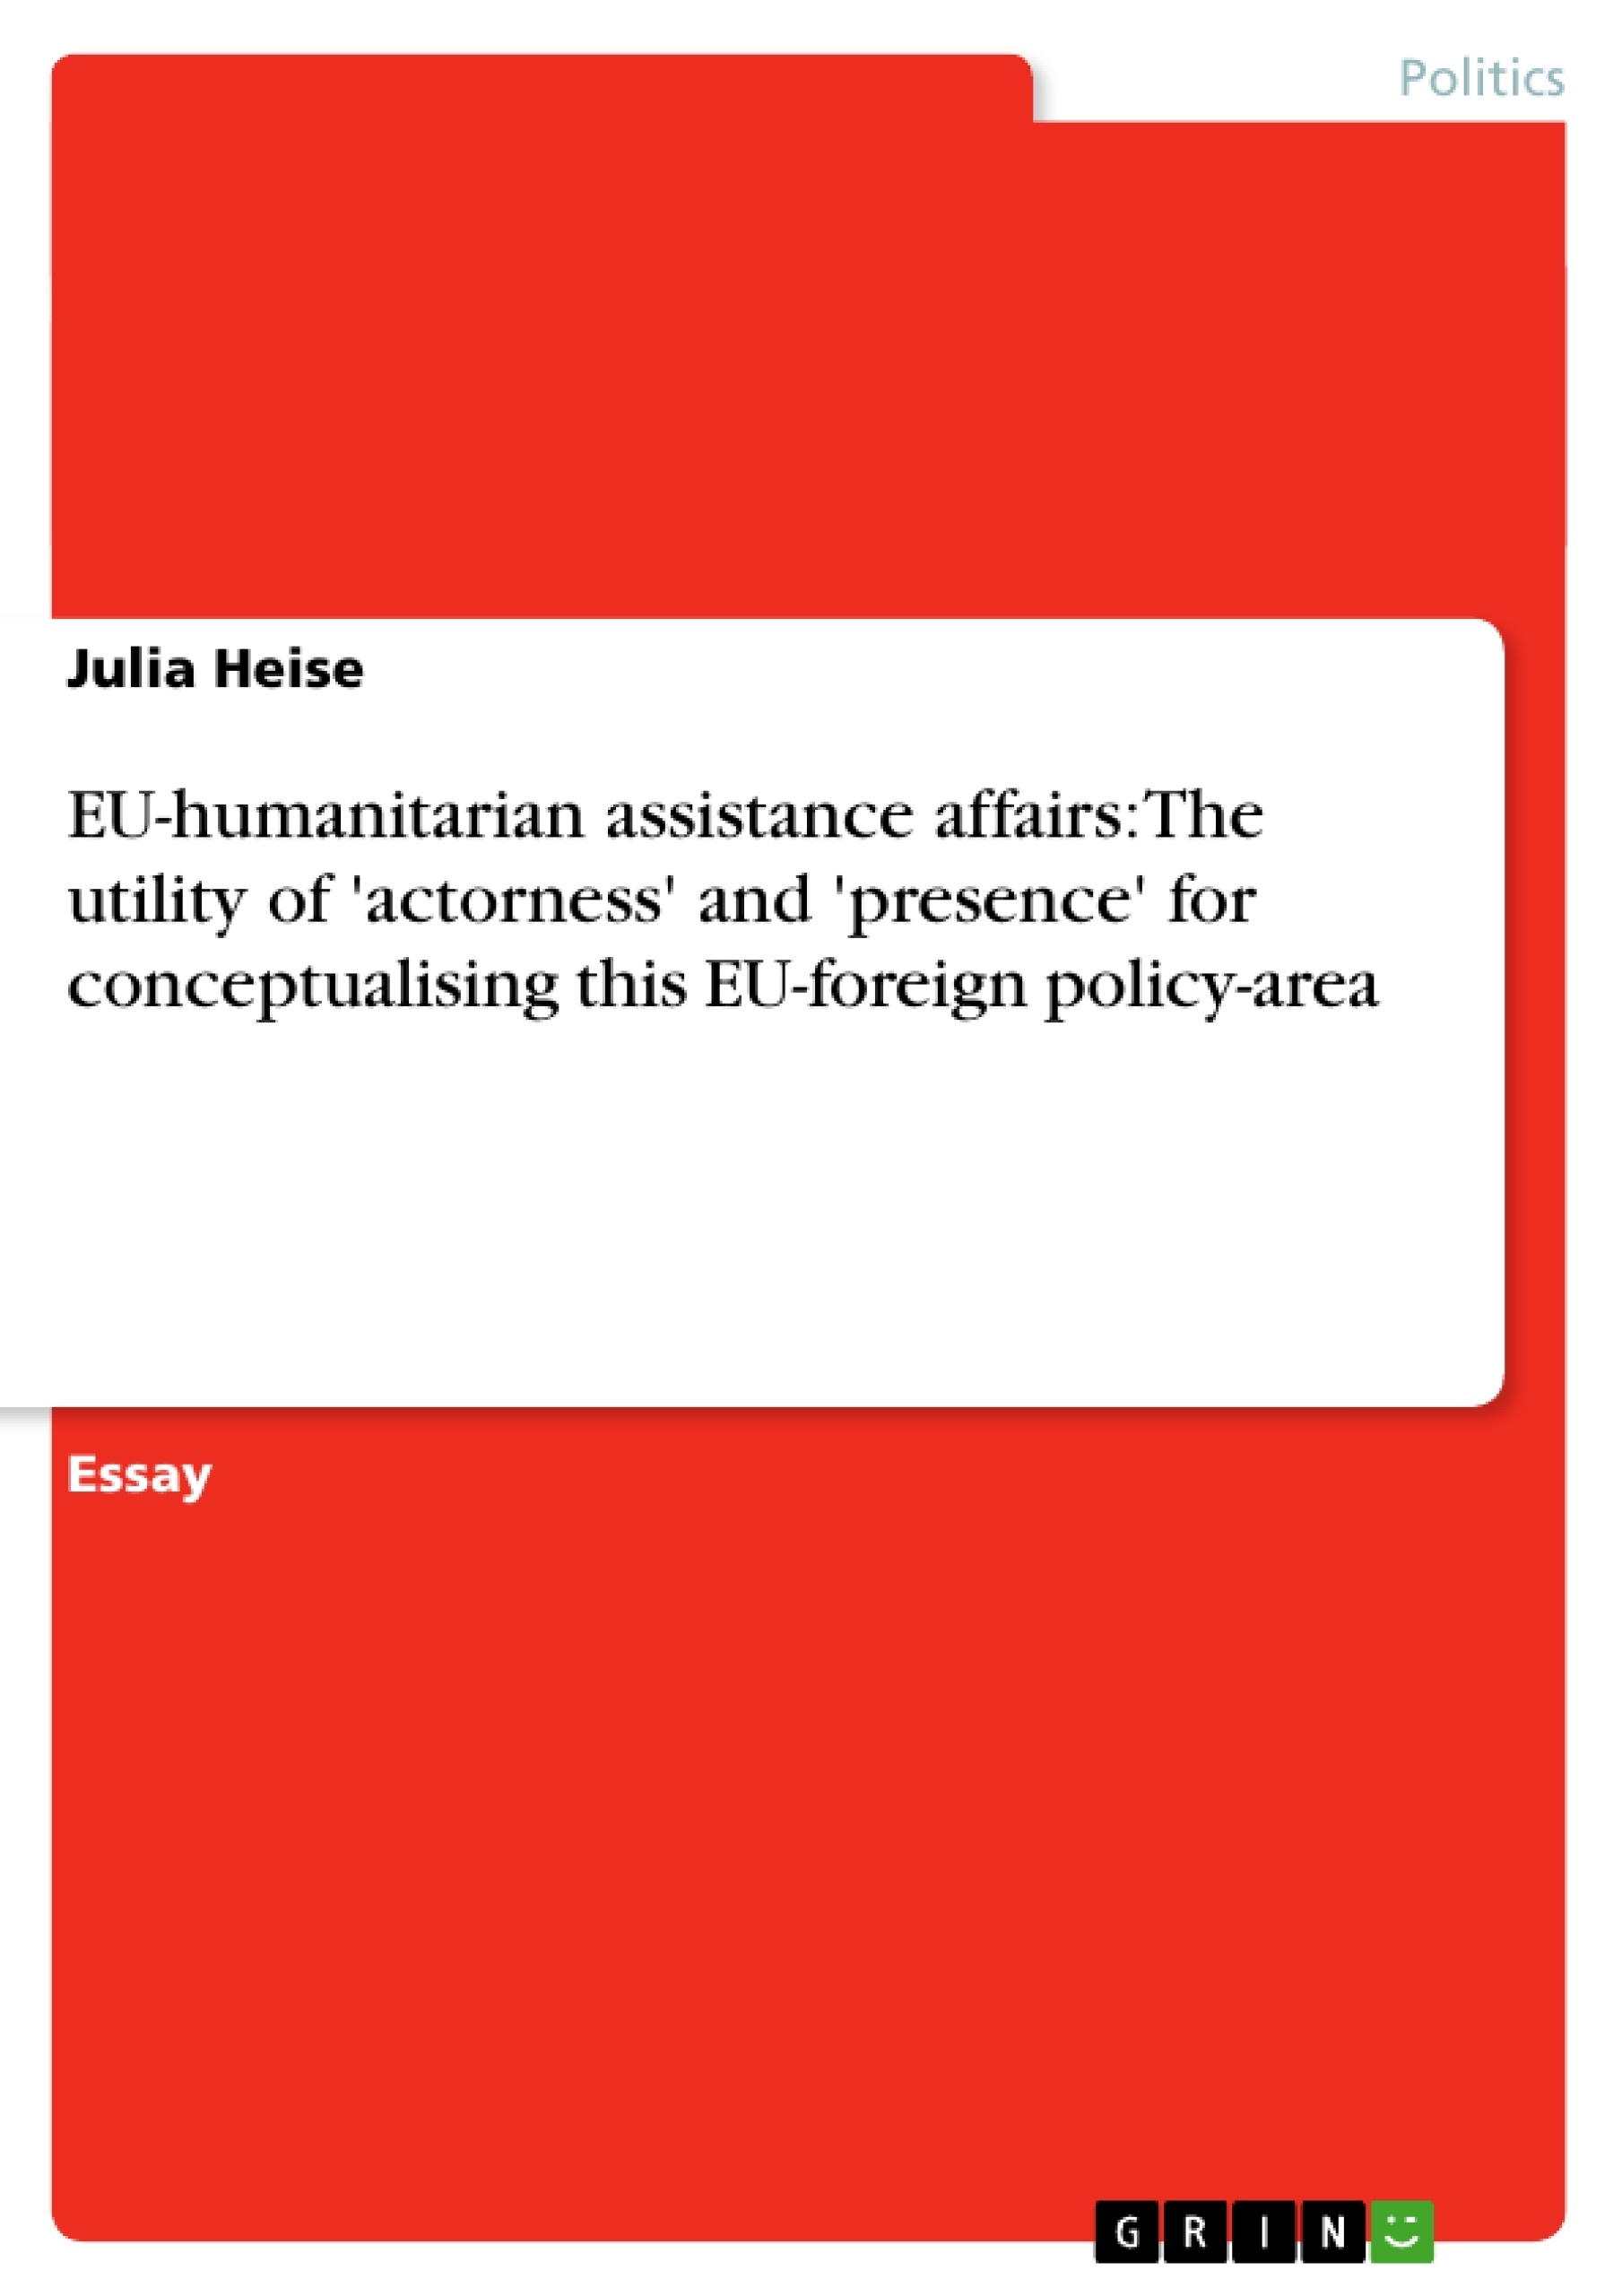 Título: EU-humanitarian assistance affairs: The utility of 'actorness' and 'presence' for conceptualising this EU-foreign policy-area